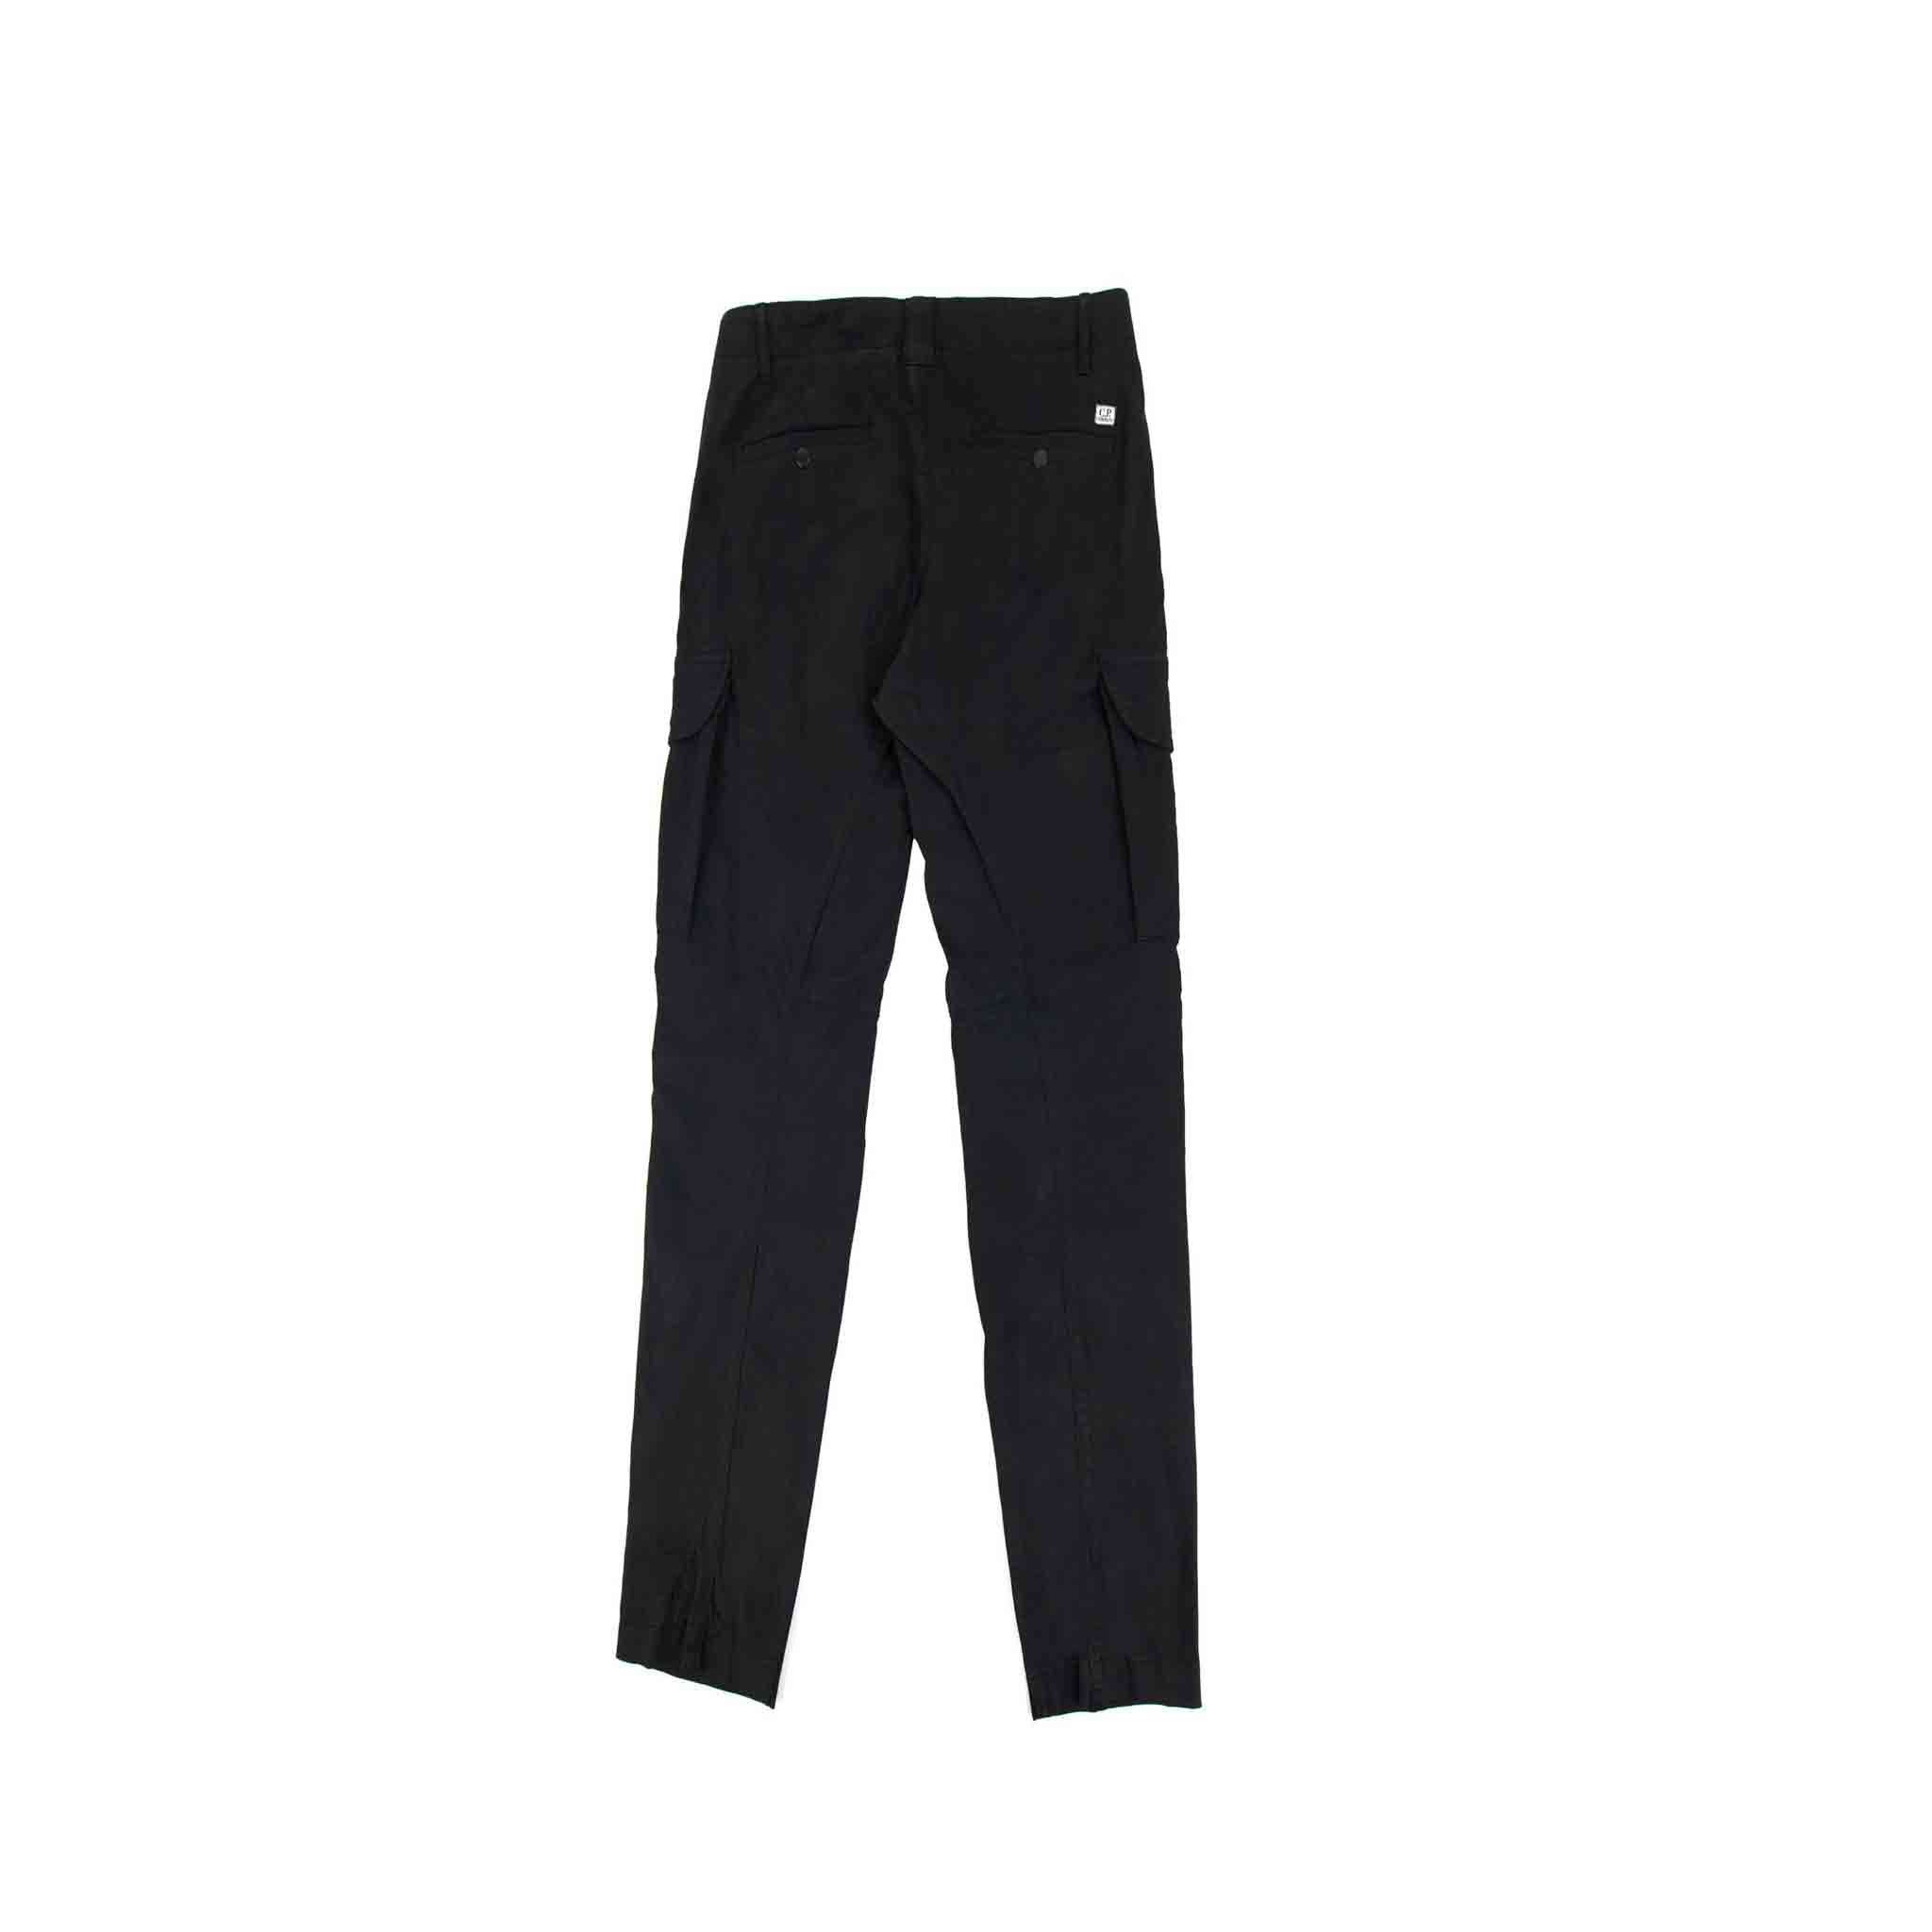 C.P. Company Stretch Sateen Cargo Pants in Black